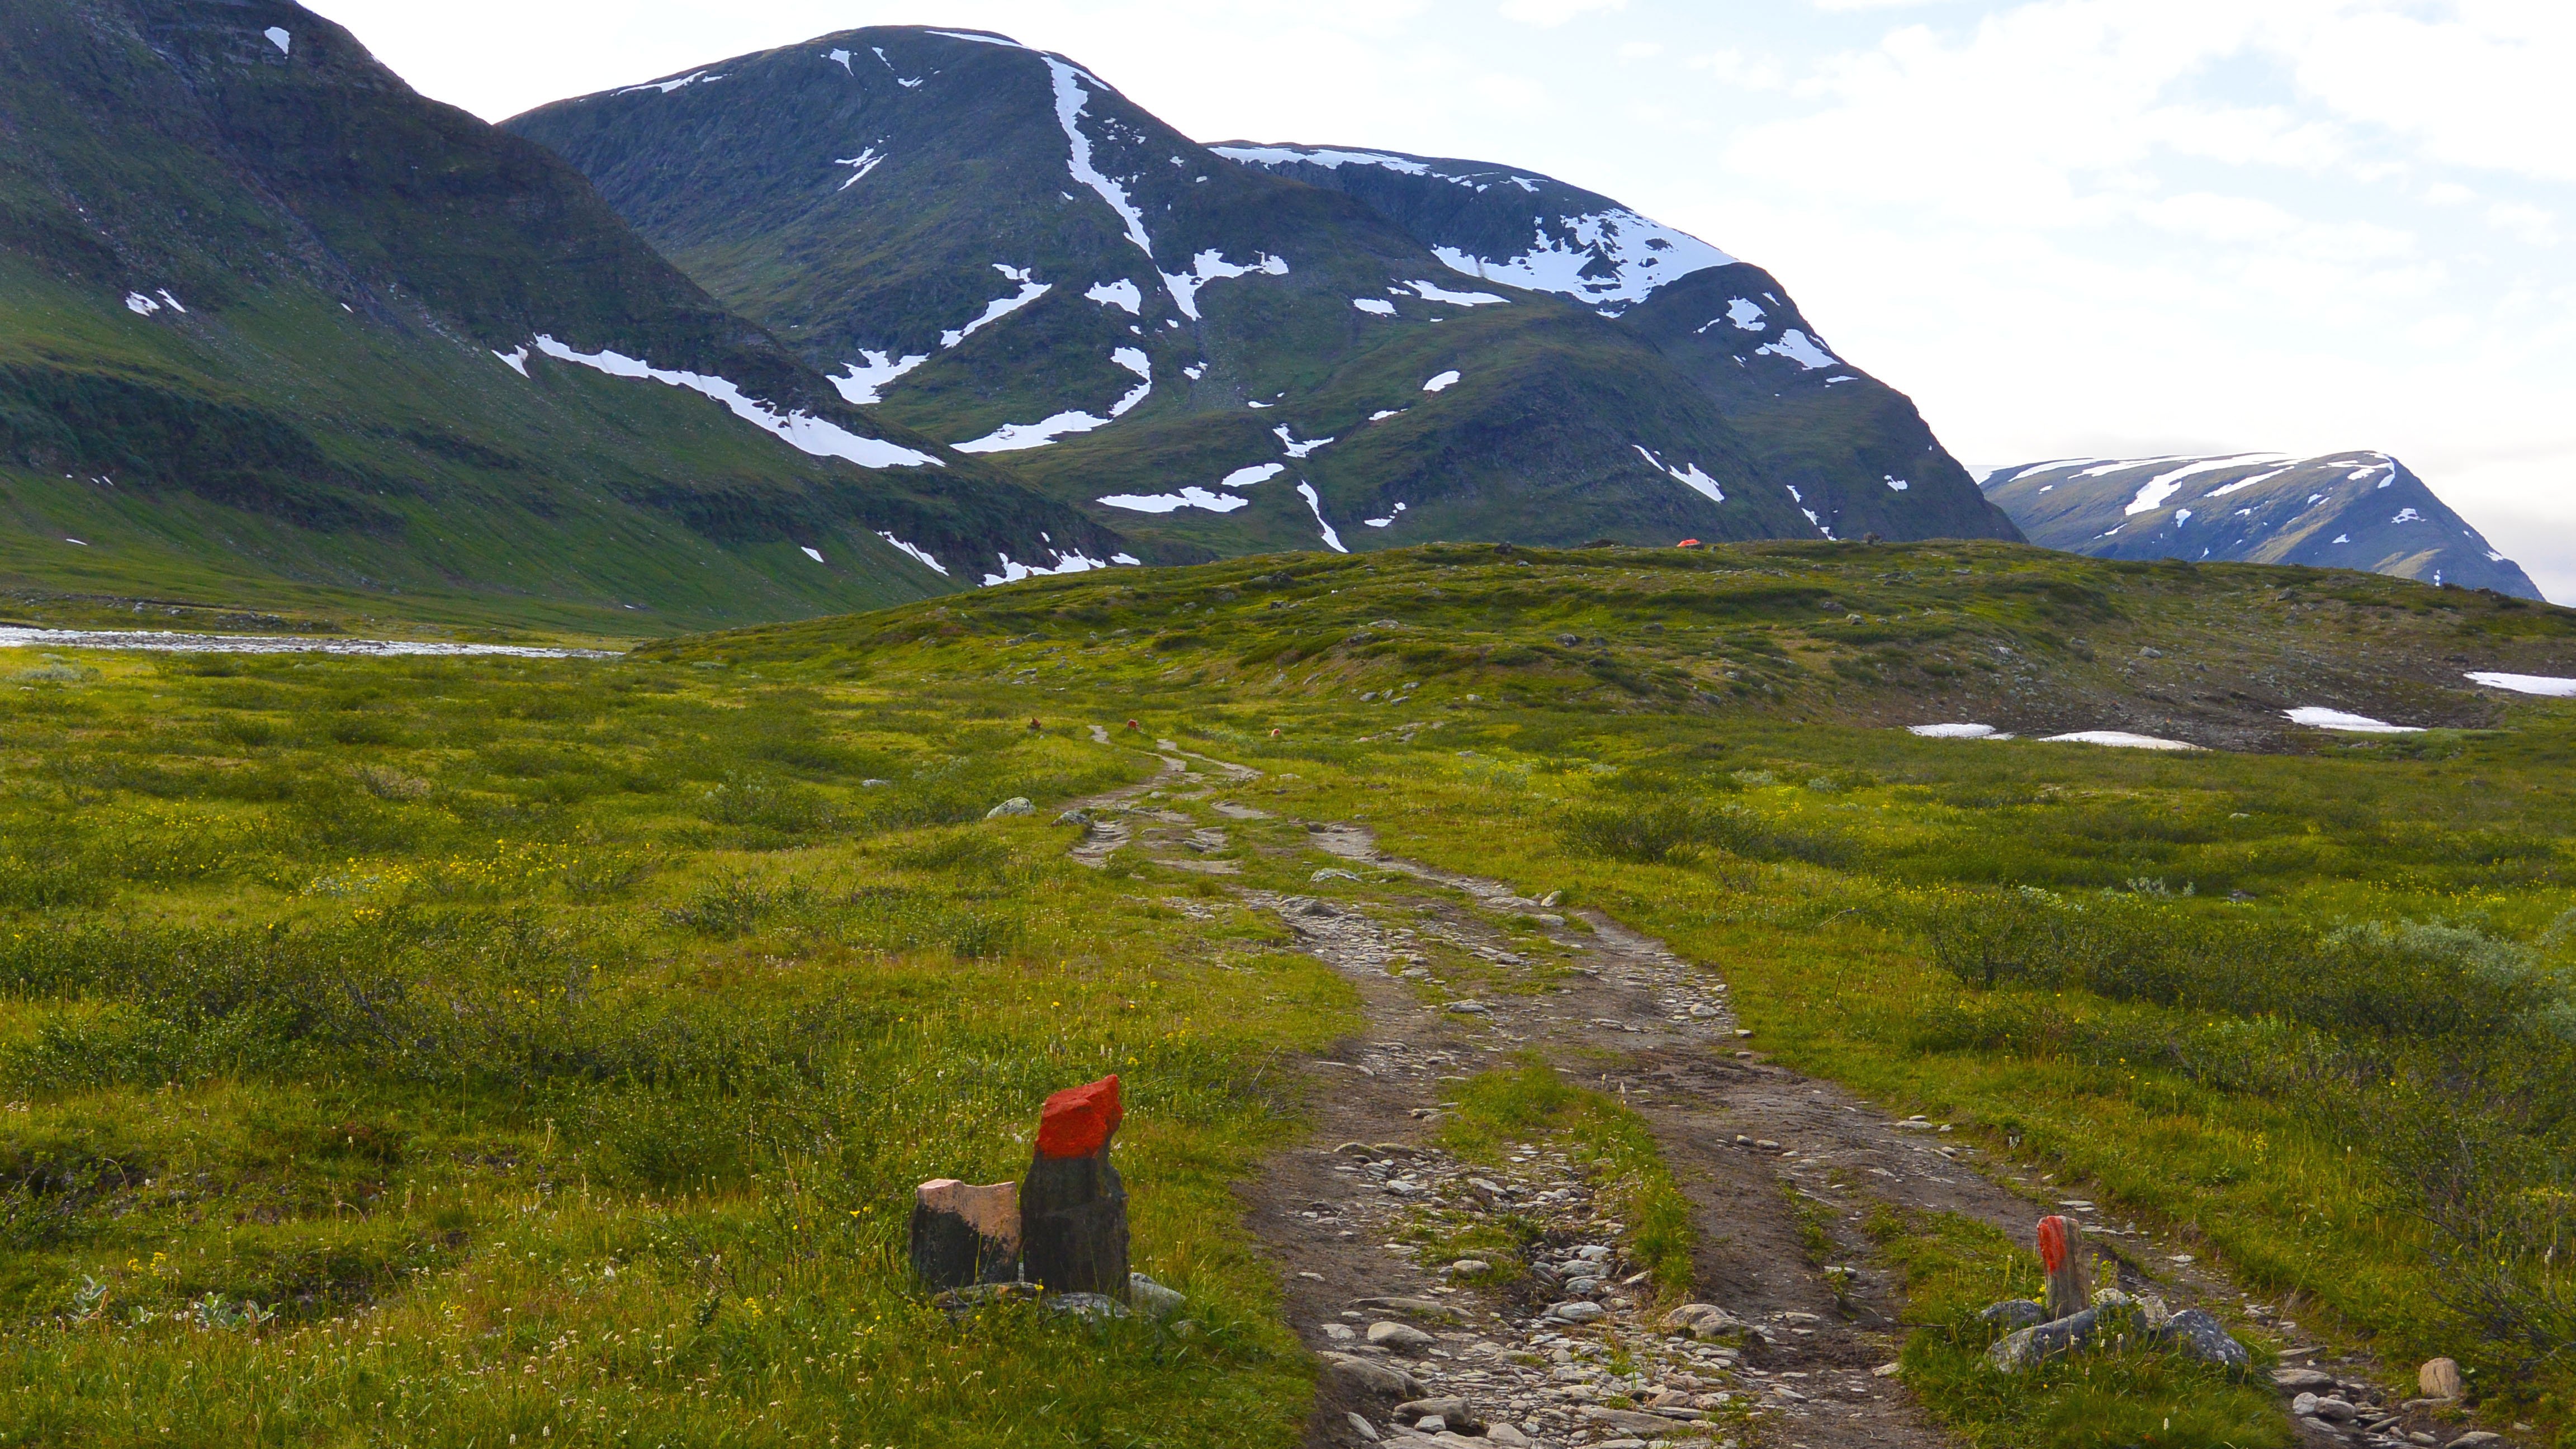 Sälka-Singi, The King's Trail and The Arctic Trail